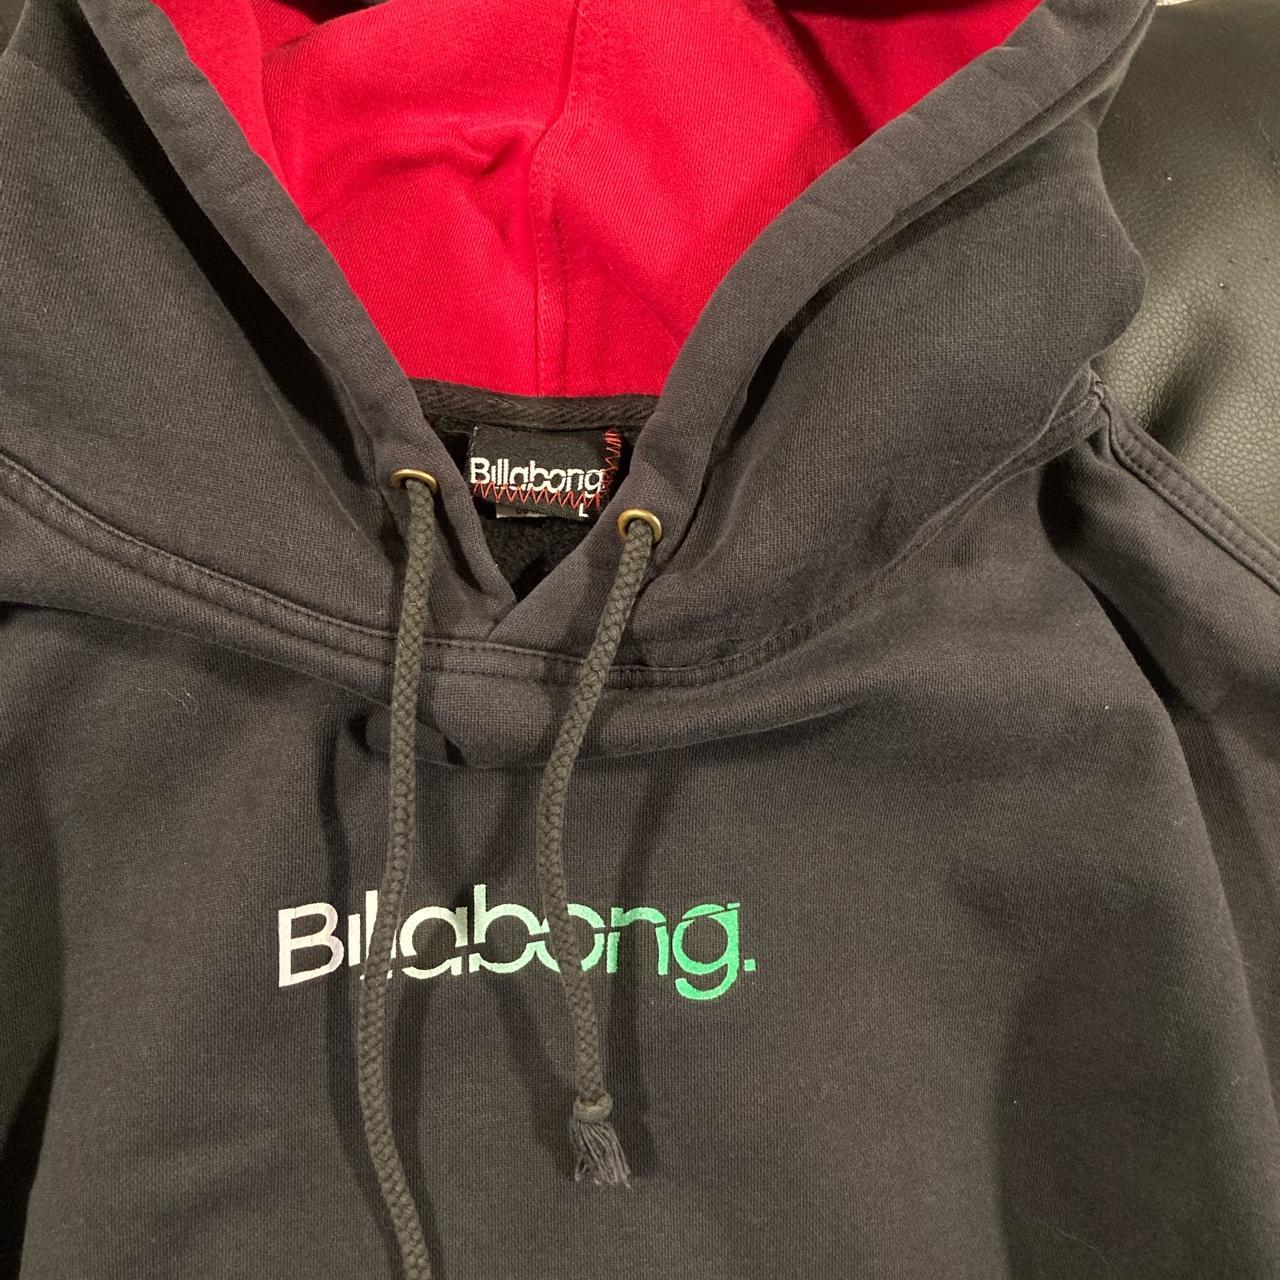 Vintage billabong hoodie xl $5 shipping only has... - Depop